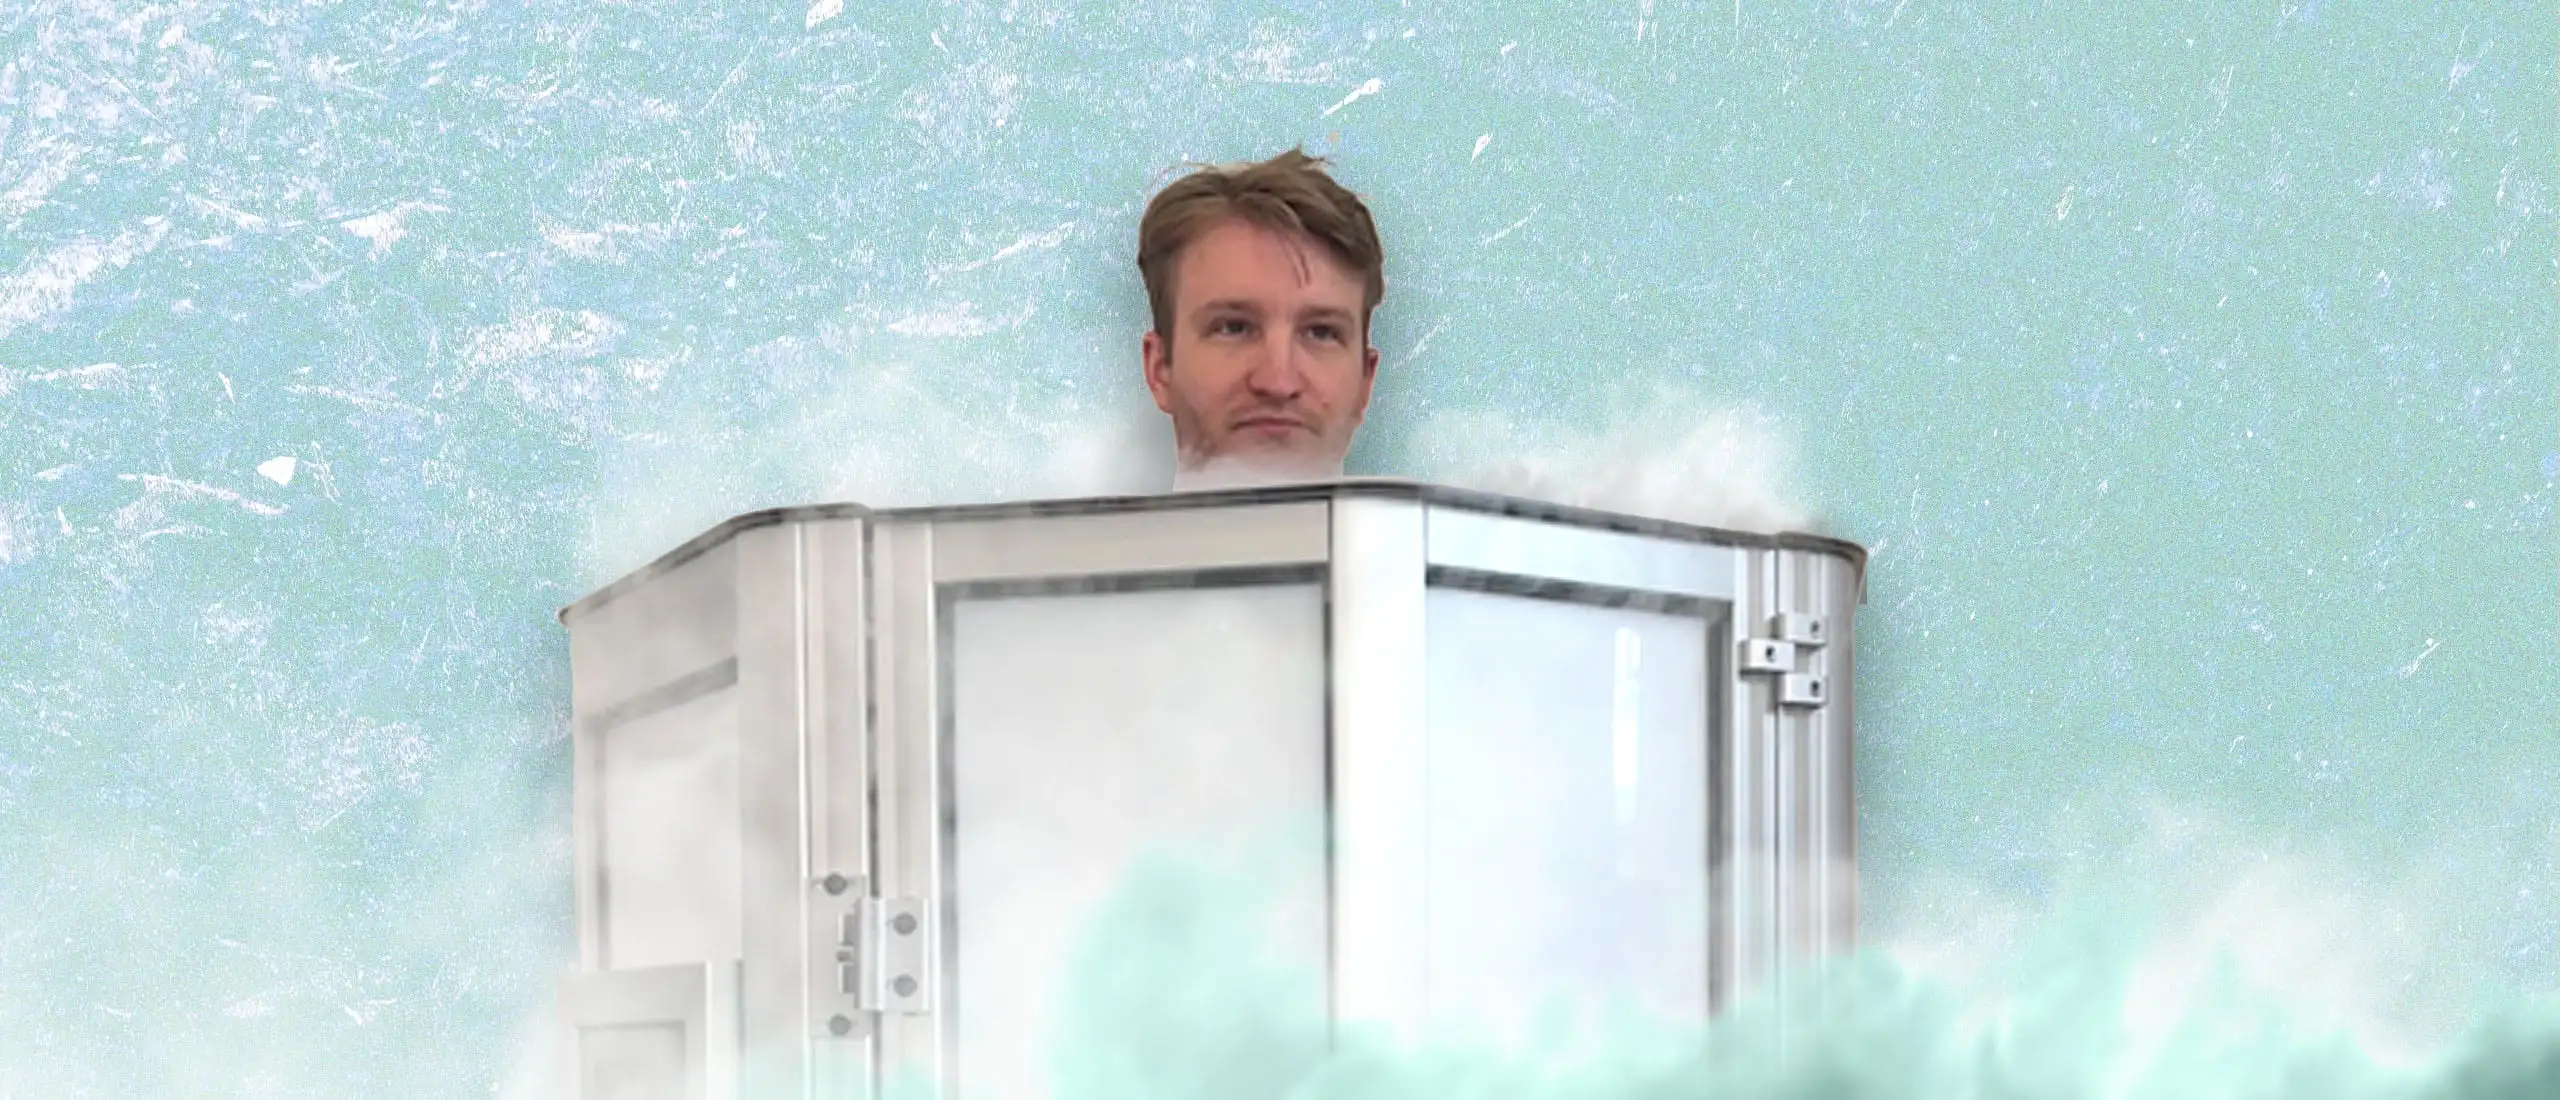 man has his head above the top of a cryotherapy chamber